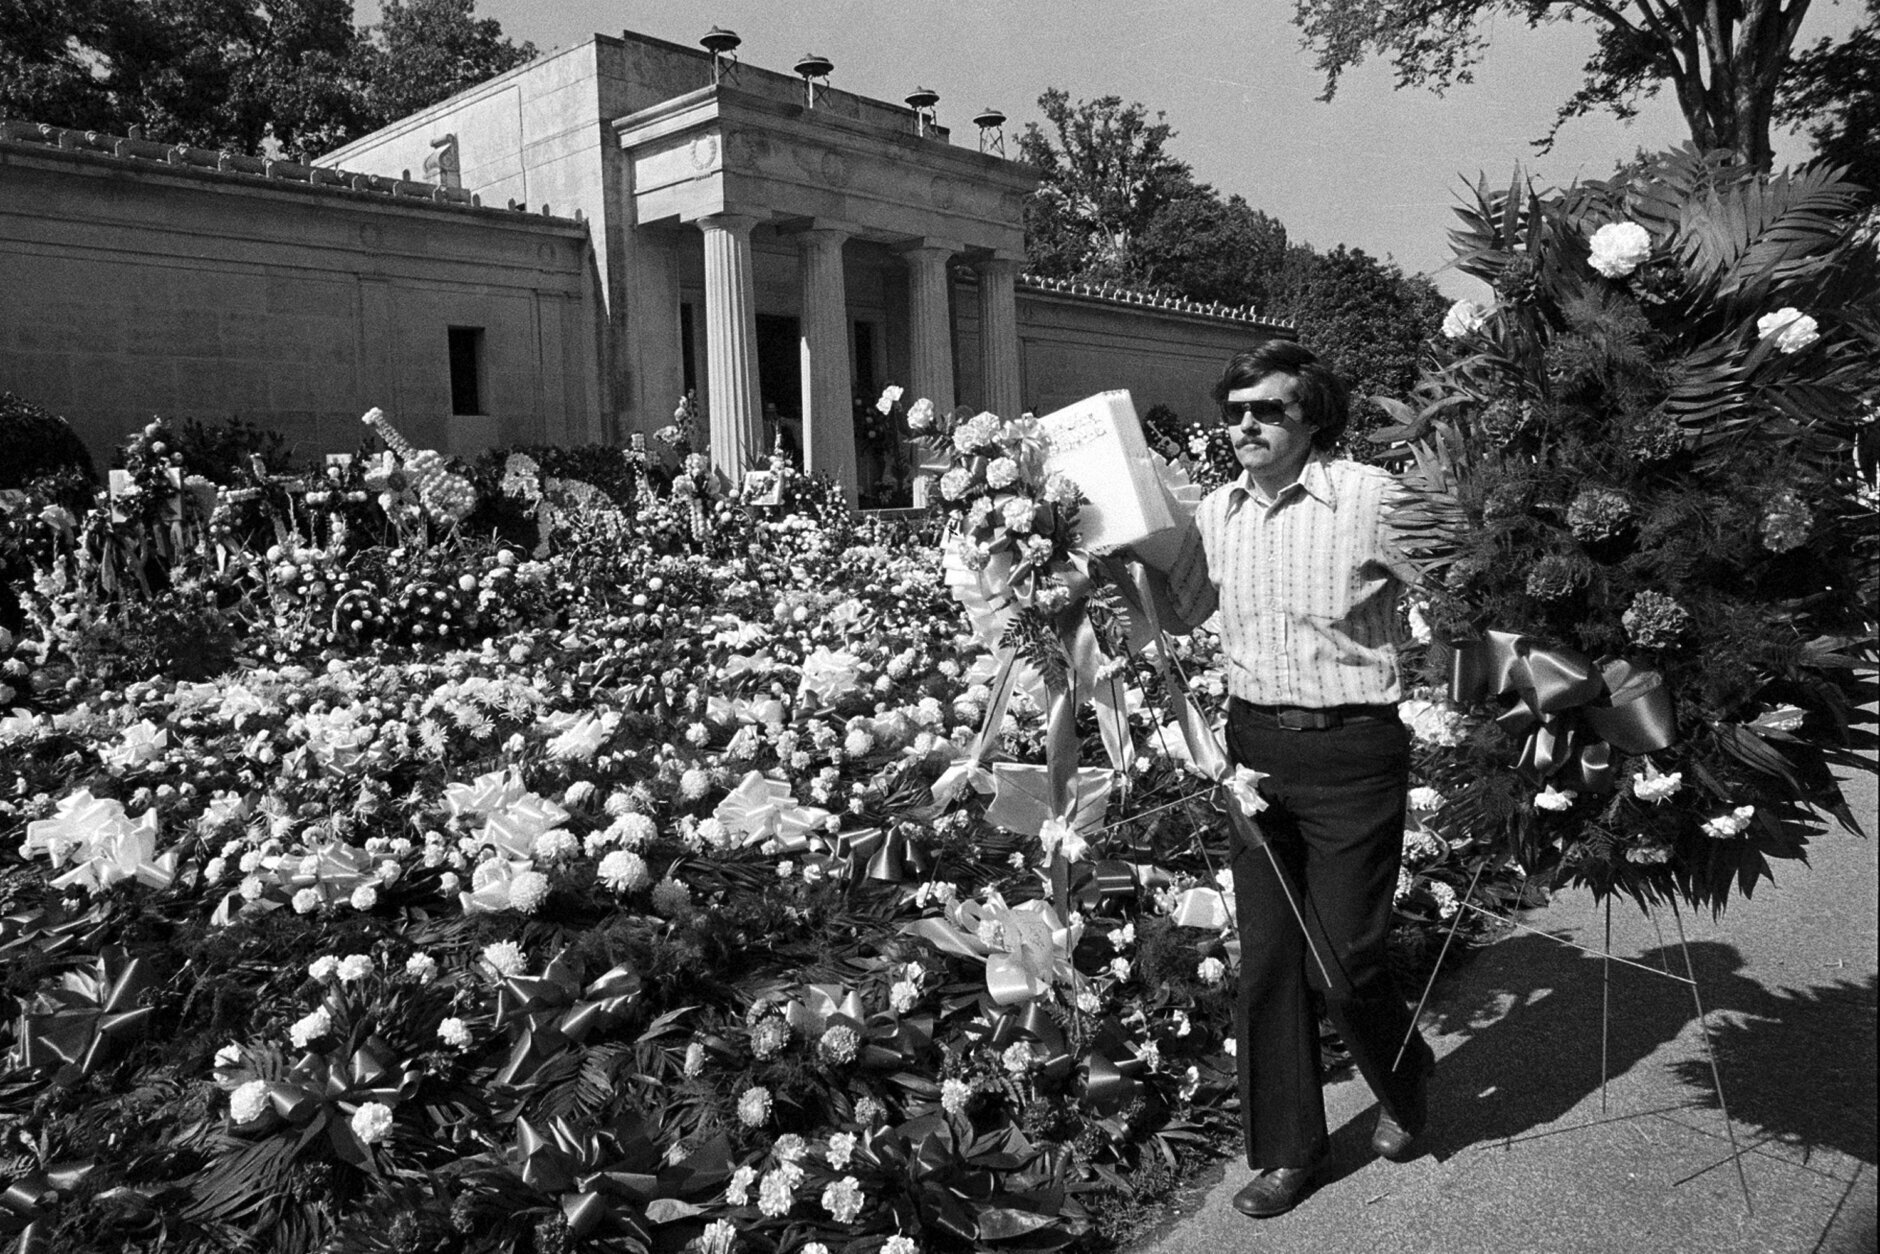 FILE - A florist adds more floral arrangements to the overflowing collection of flowers that cover the ground at the mausoleum Aug. 18, 1977, where singer Elvis Presley was entombed during funeral services in Memphis, Tenn. (AP Photo, File)